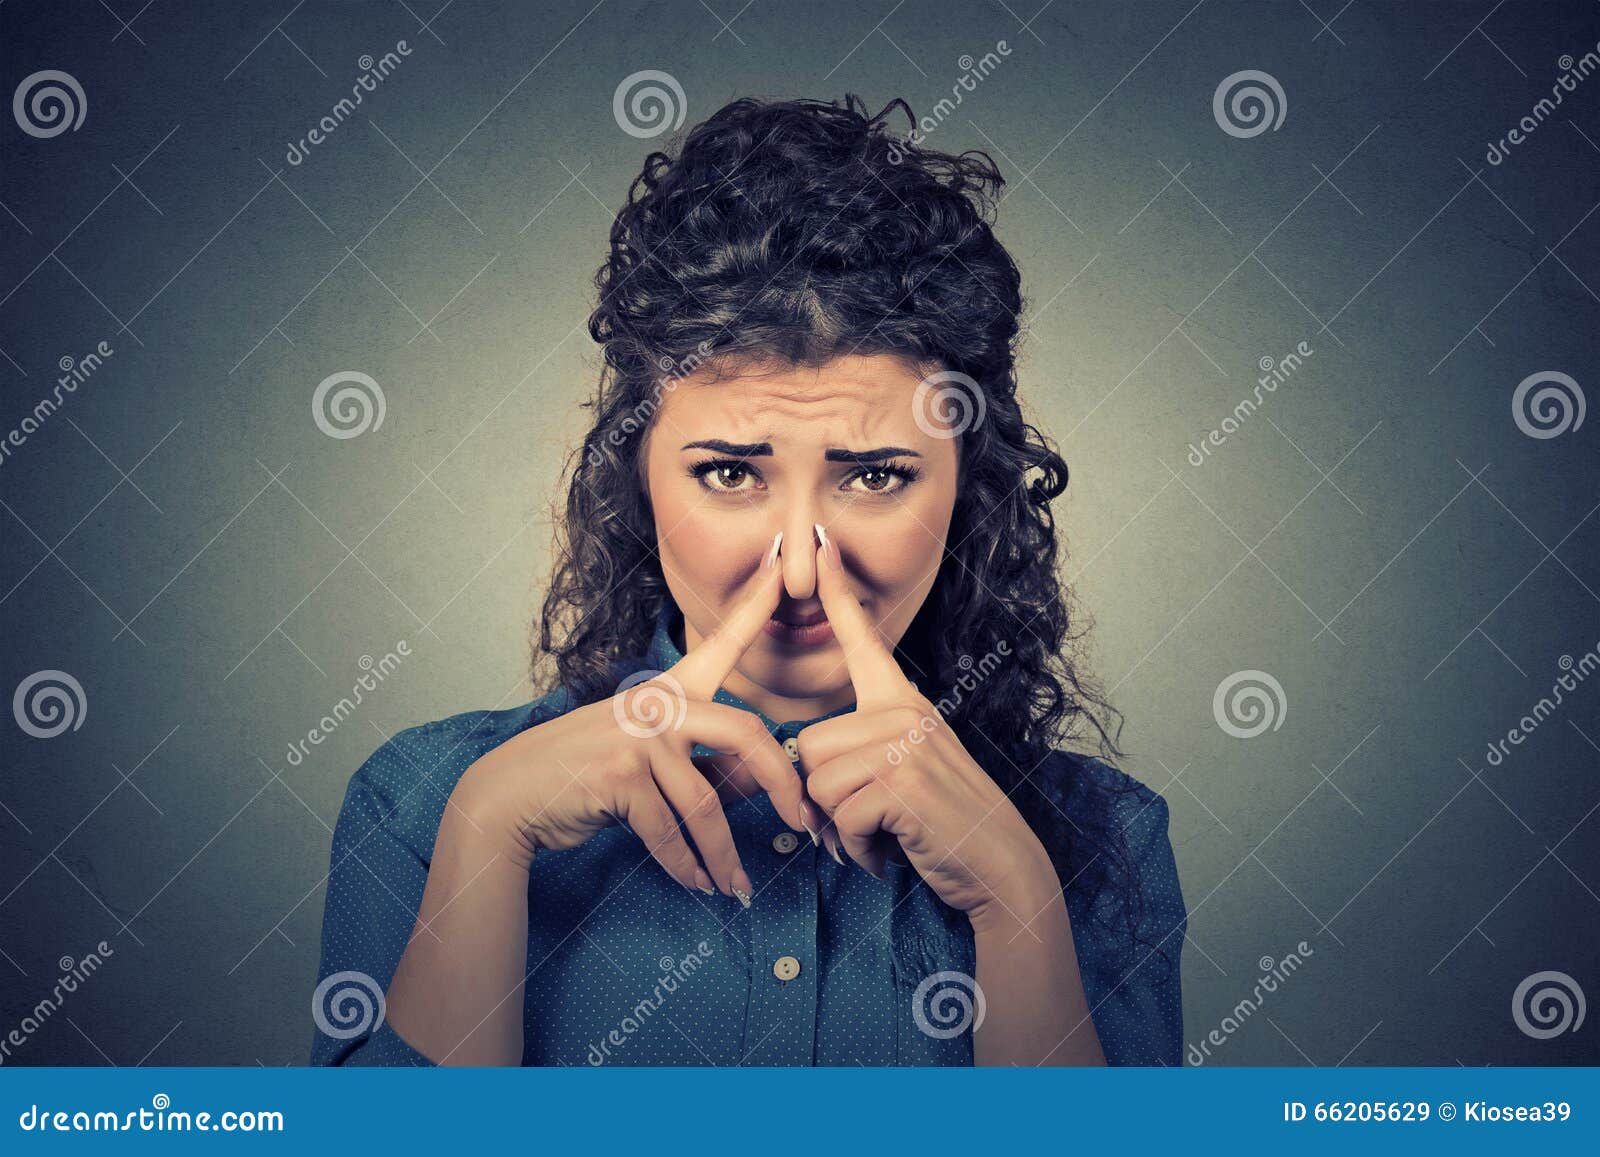 woman pinches nose with fingers looks with disgust something stinks bad smell